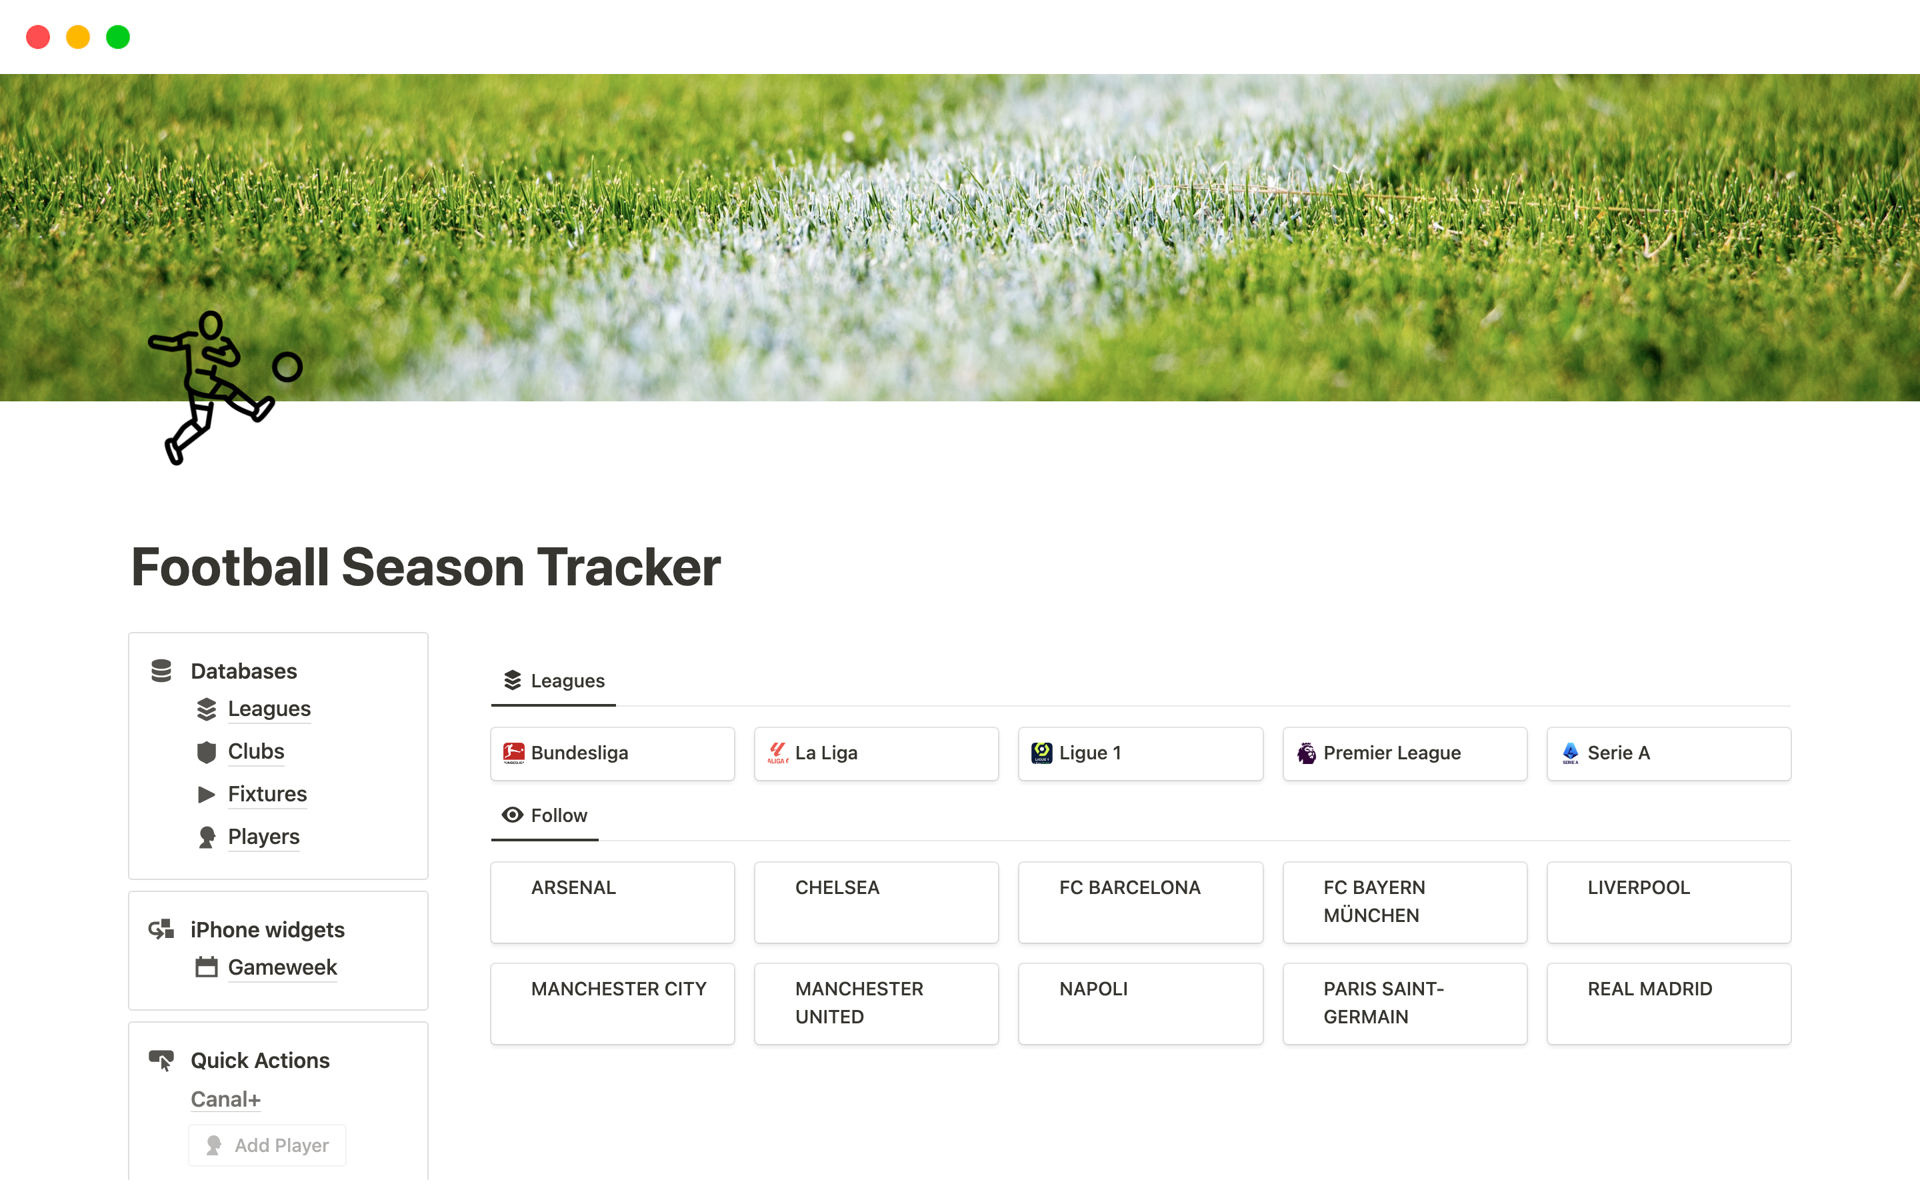 Keep track of your favorite teams fixtures among 92 clubs of the top 5 European leagues.